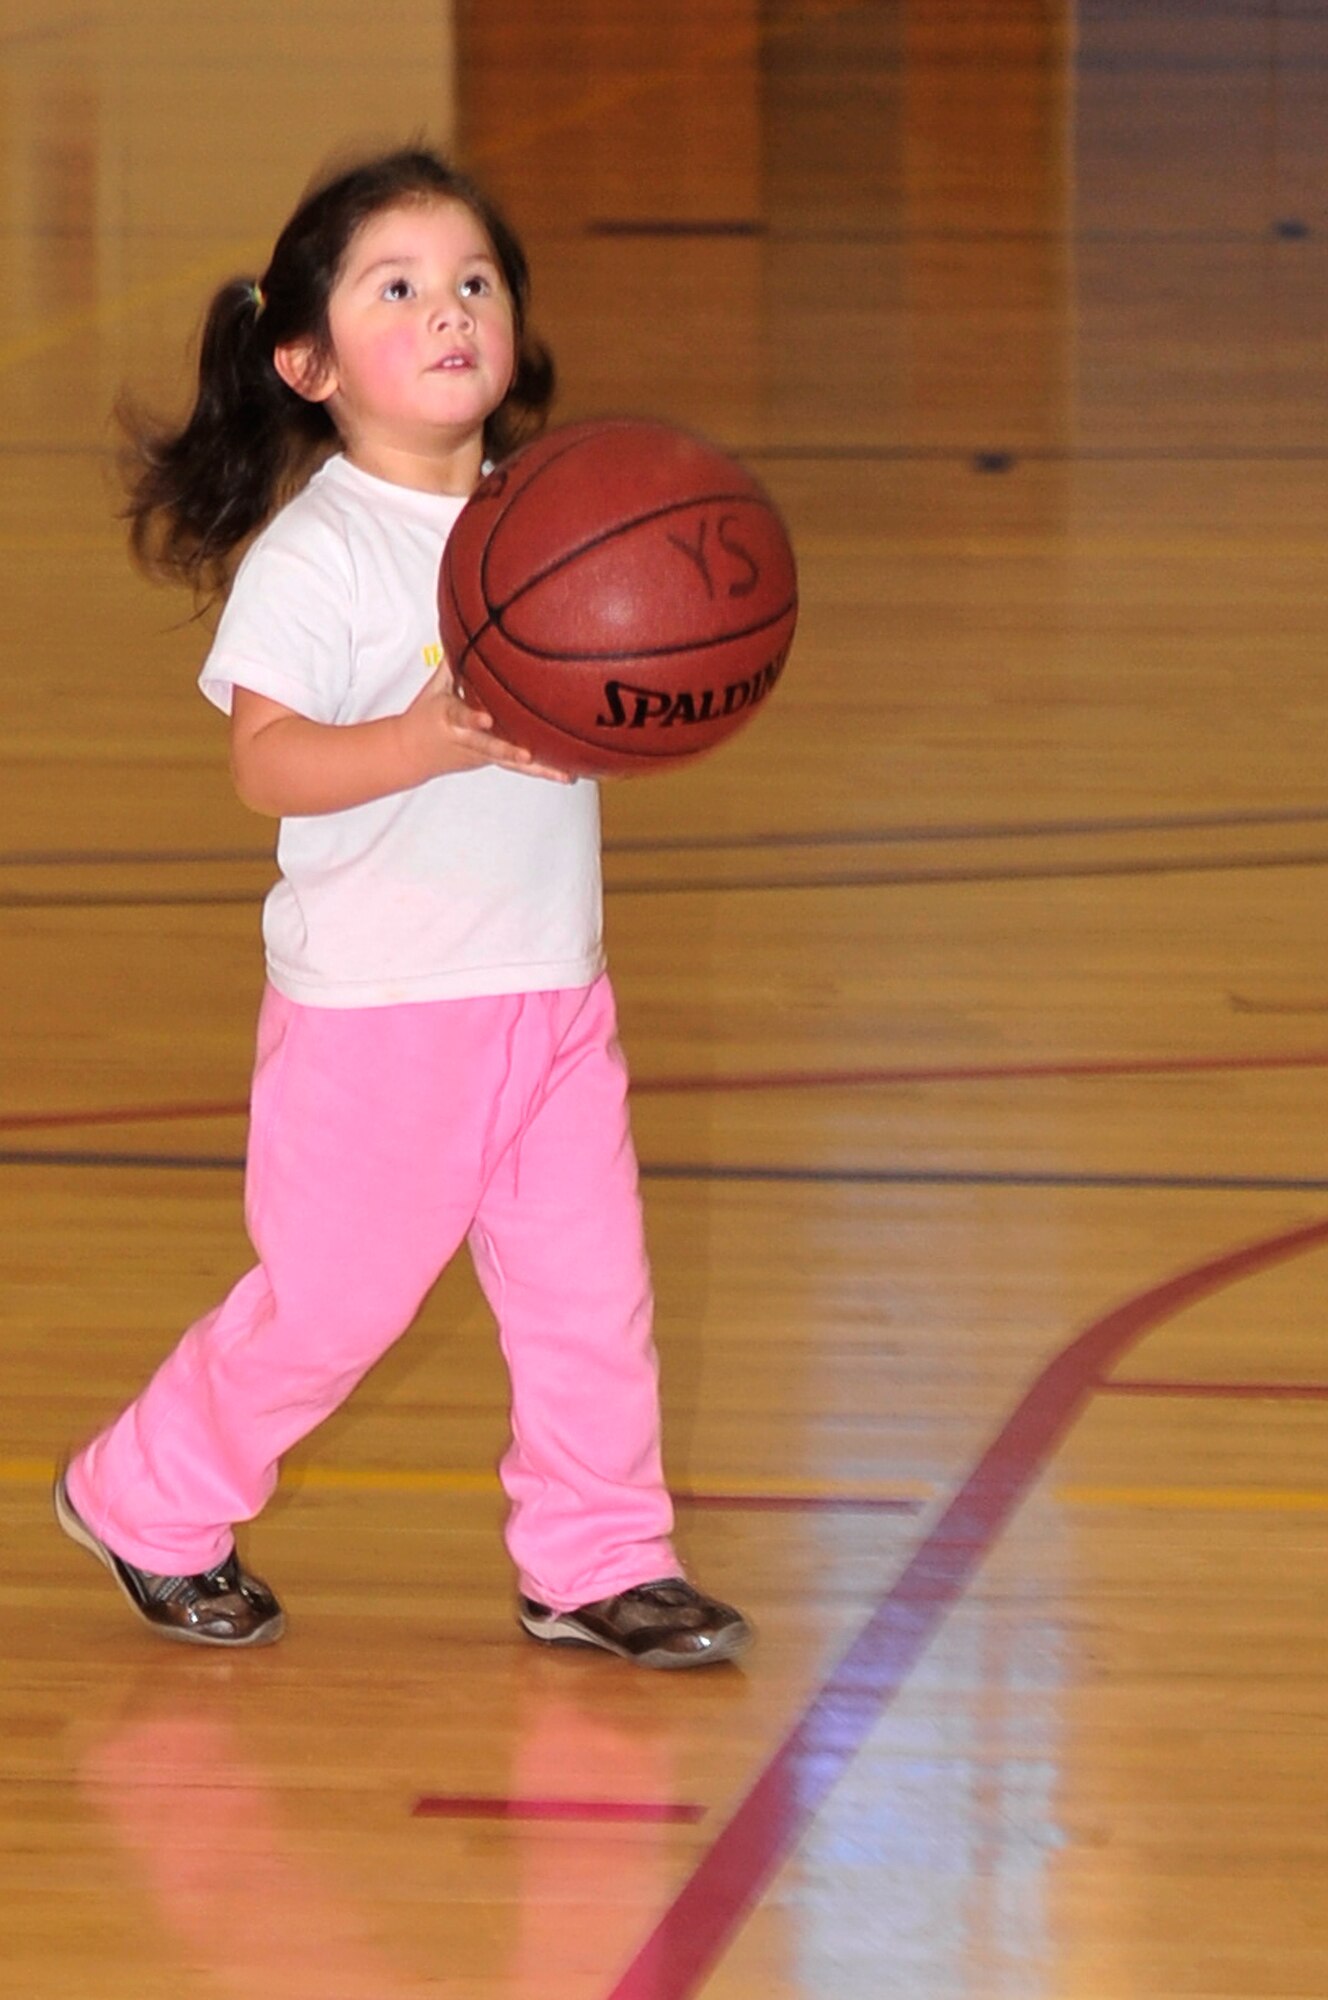 BUCKLEY AIR FORCE BASE, Colo. -- Veronica Estrada, daughter of Senior Master Sgt. Gabriel Estrada, plays basketball during the Fit Factor Family event at the Buckley Fitness Center March 13. (U.S. Air Force photo by Airman 1st Class Manisha Vasquez)